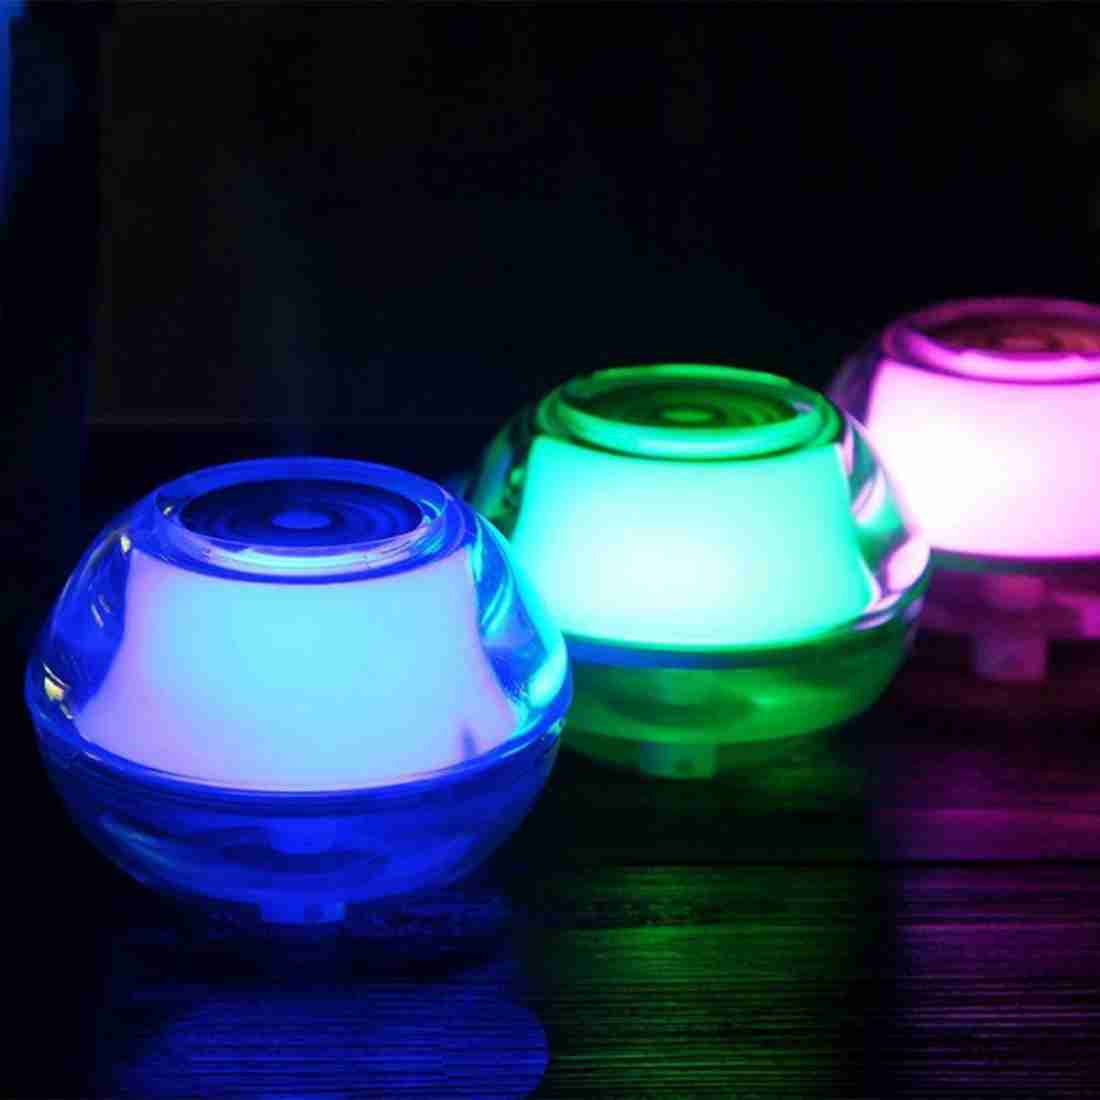 LAMANSH Bulb Air Humidifier Multicolor / Plastic / 1 LAMANSH® Magic Cool Mist Humidifiers Essential Oil Diffuser Aroma Air Humidifier with Led Night Light Colorful Change for Car, Office, Babies, Humidifiers for Home